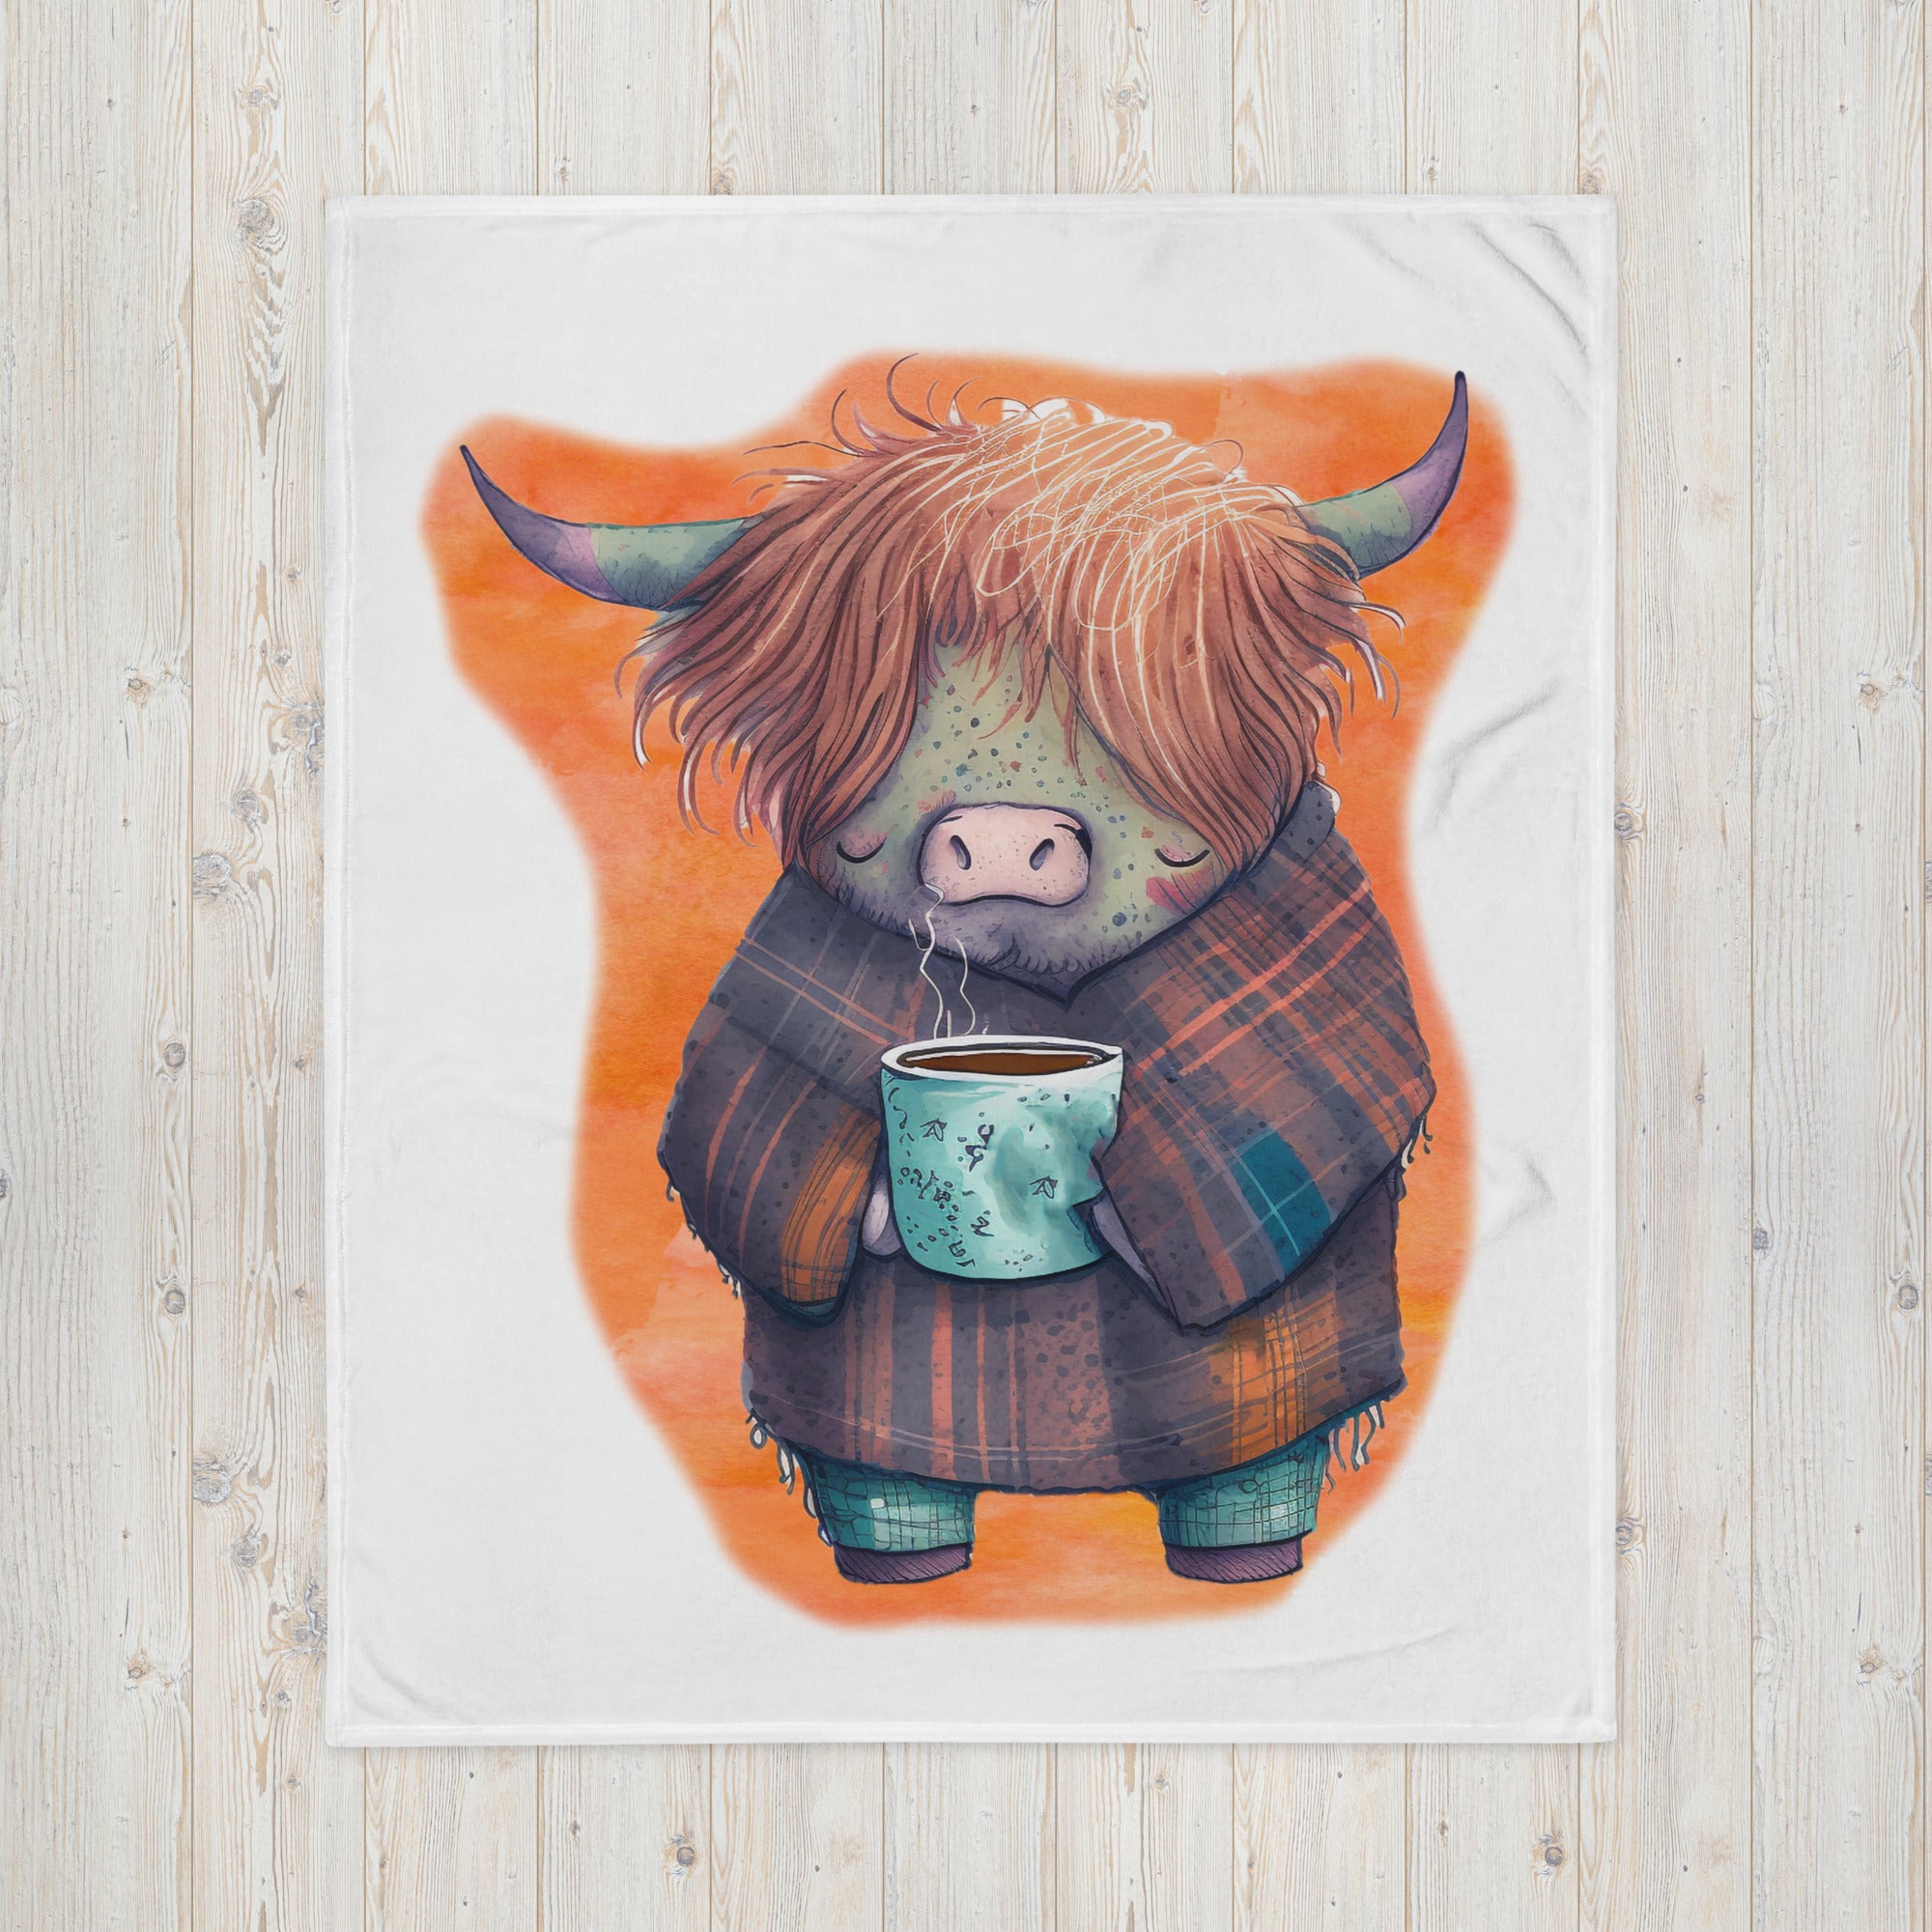 Sleepy Highland Cow 100% Polyester Soft Silk Touch Fabric Throw Blanket - Cozy, Durable and Adorable